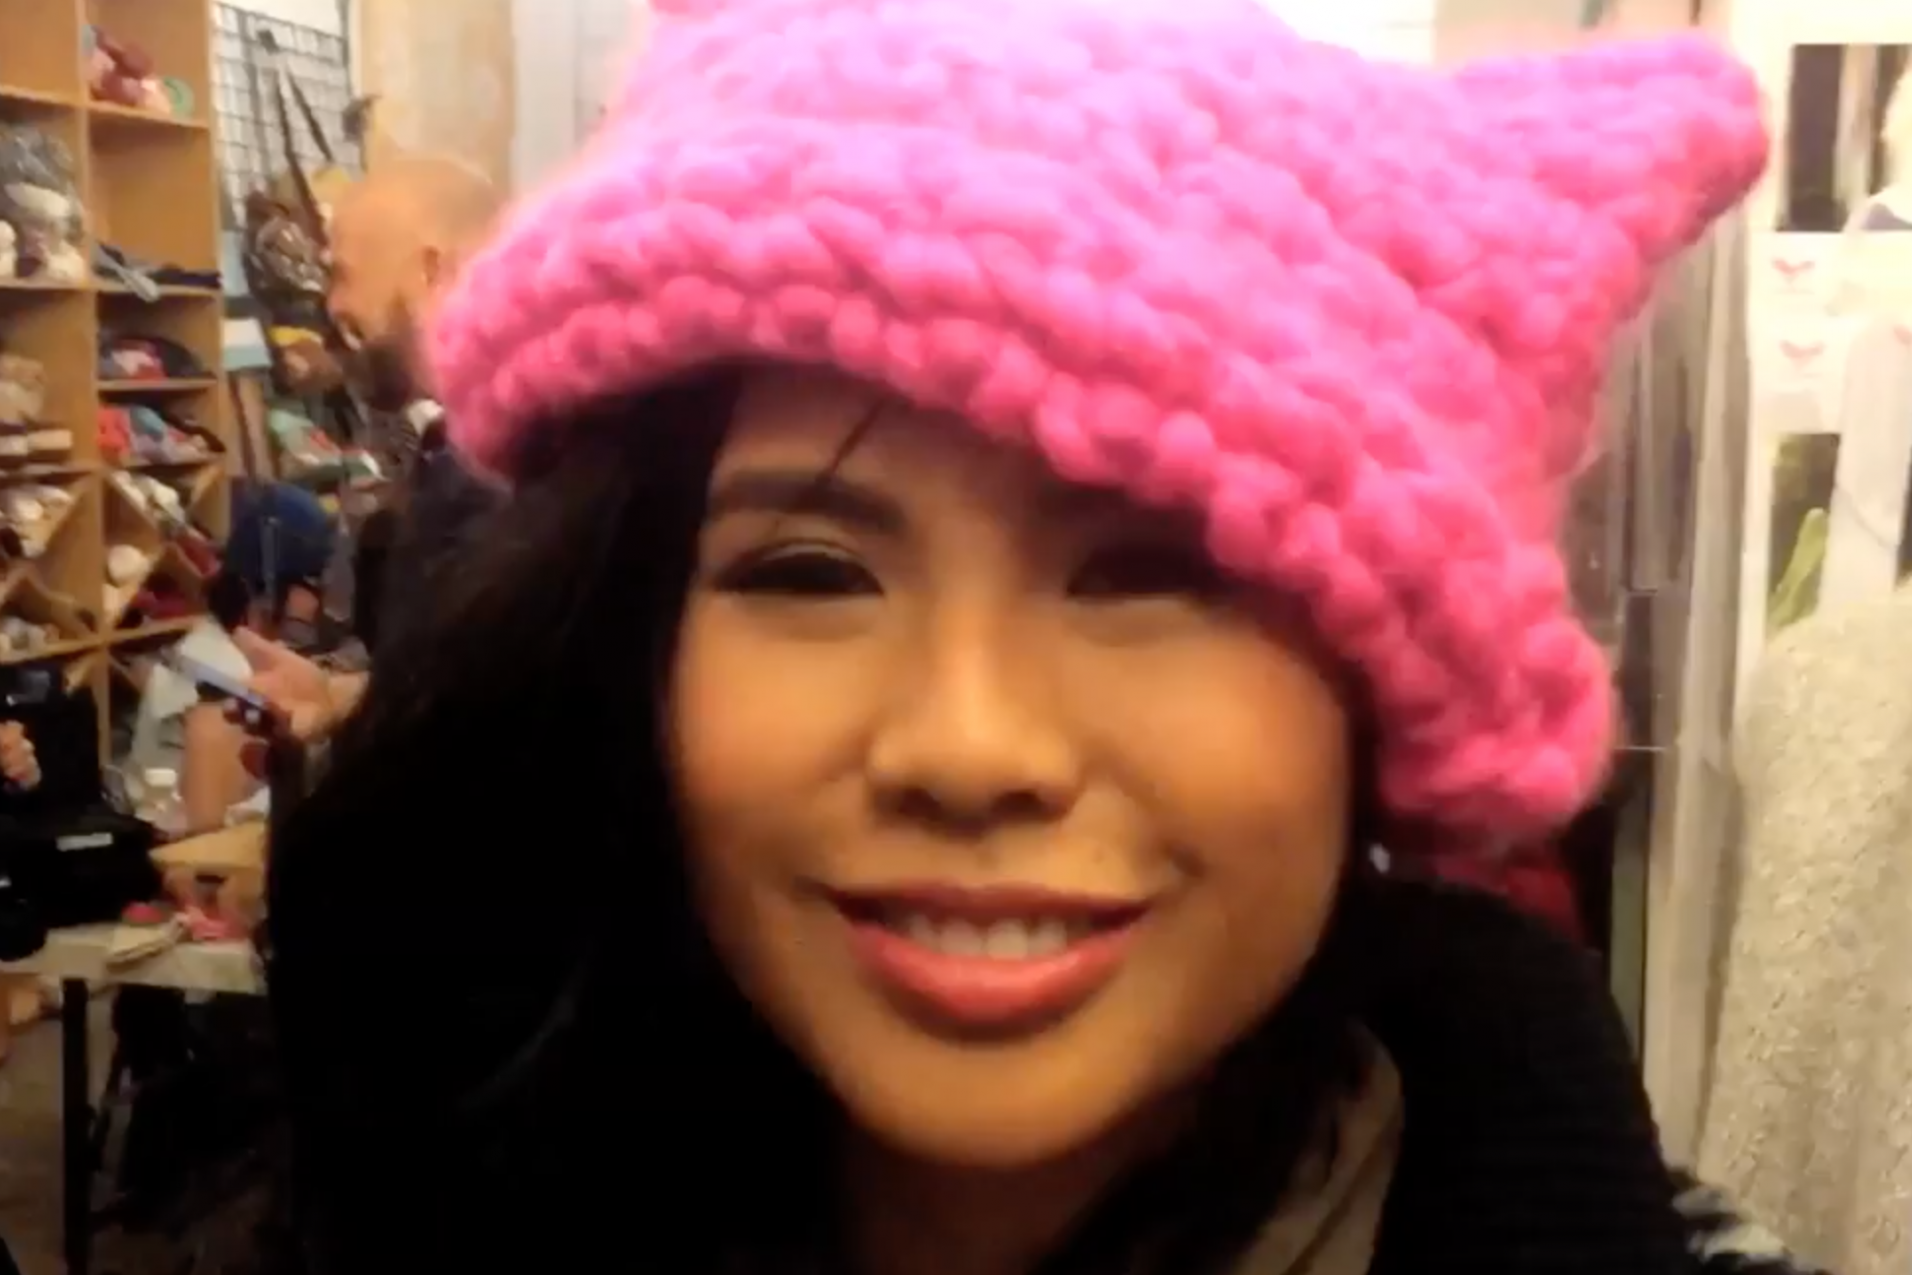 Krista Suh and friends began crafting handmade pink caps with cat ears as a reference to Donald Trump's statements about grabbing women's genitals